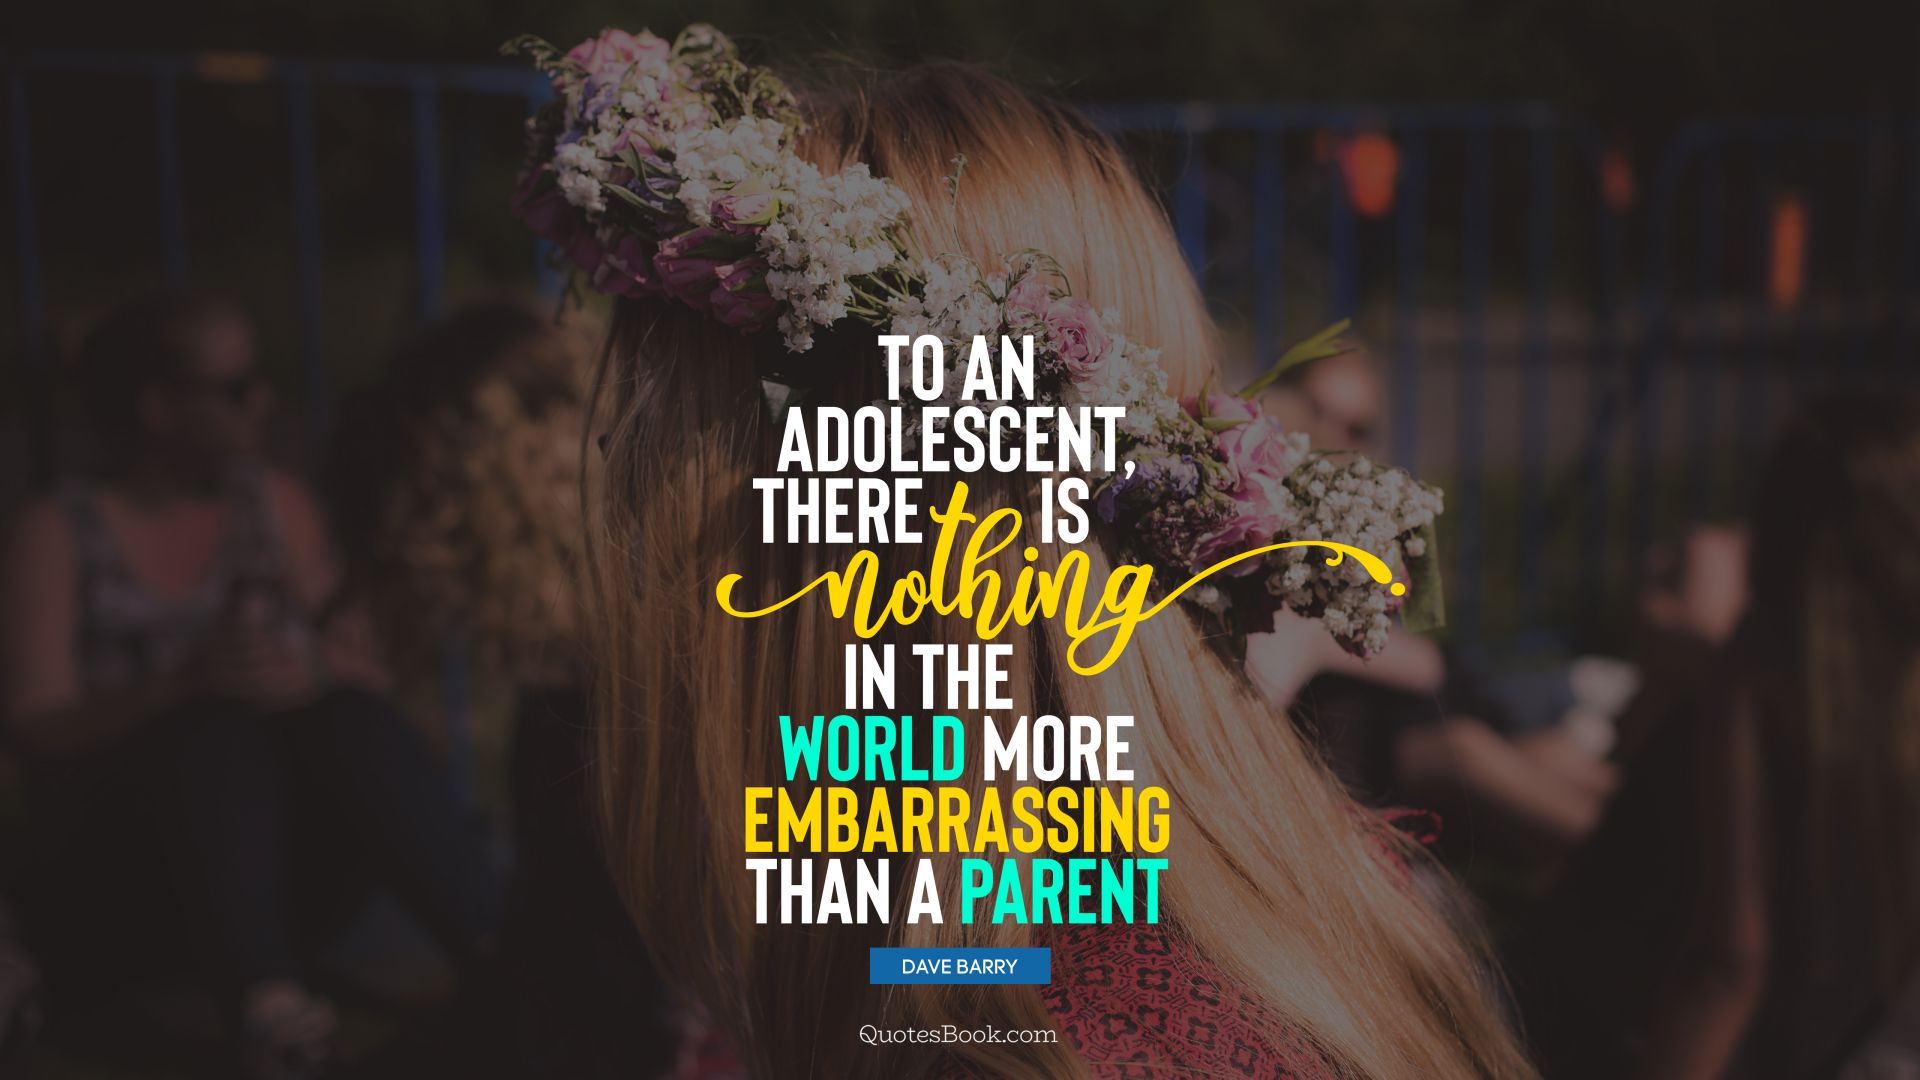 To an adolescent, there is nothing in the world more embarrassing than a parent. - Quote by Dave Barry